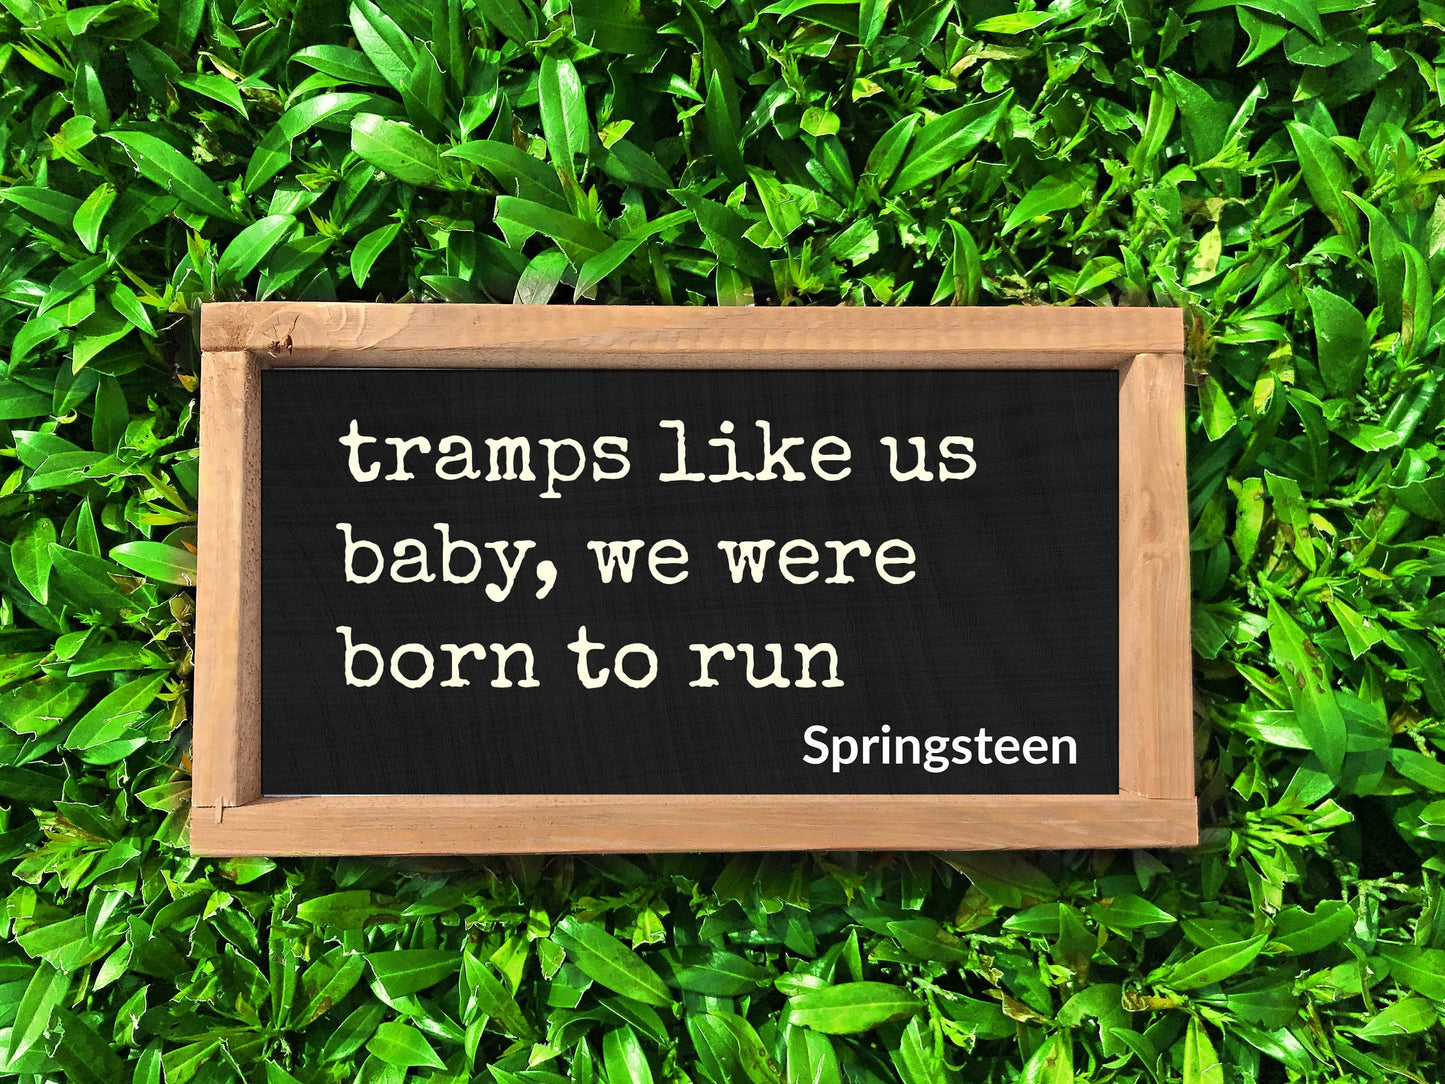 Bruce Springsteen Lyrics | Farmhouse Sign | Anniversary Gift for Her | Tramps Like Us Lyrics Sign | Personalized Wedding Sign